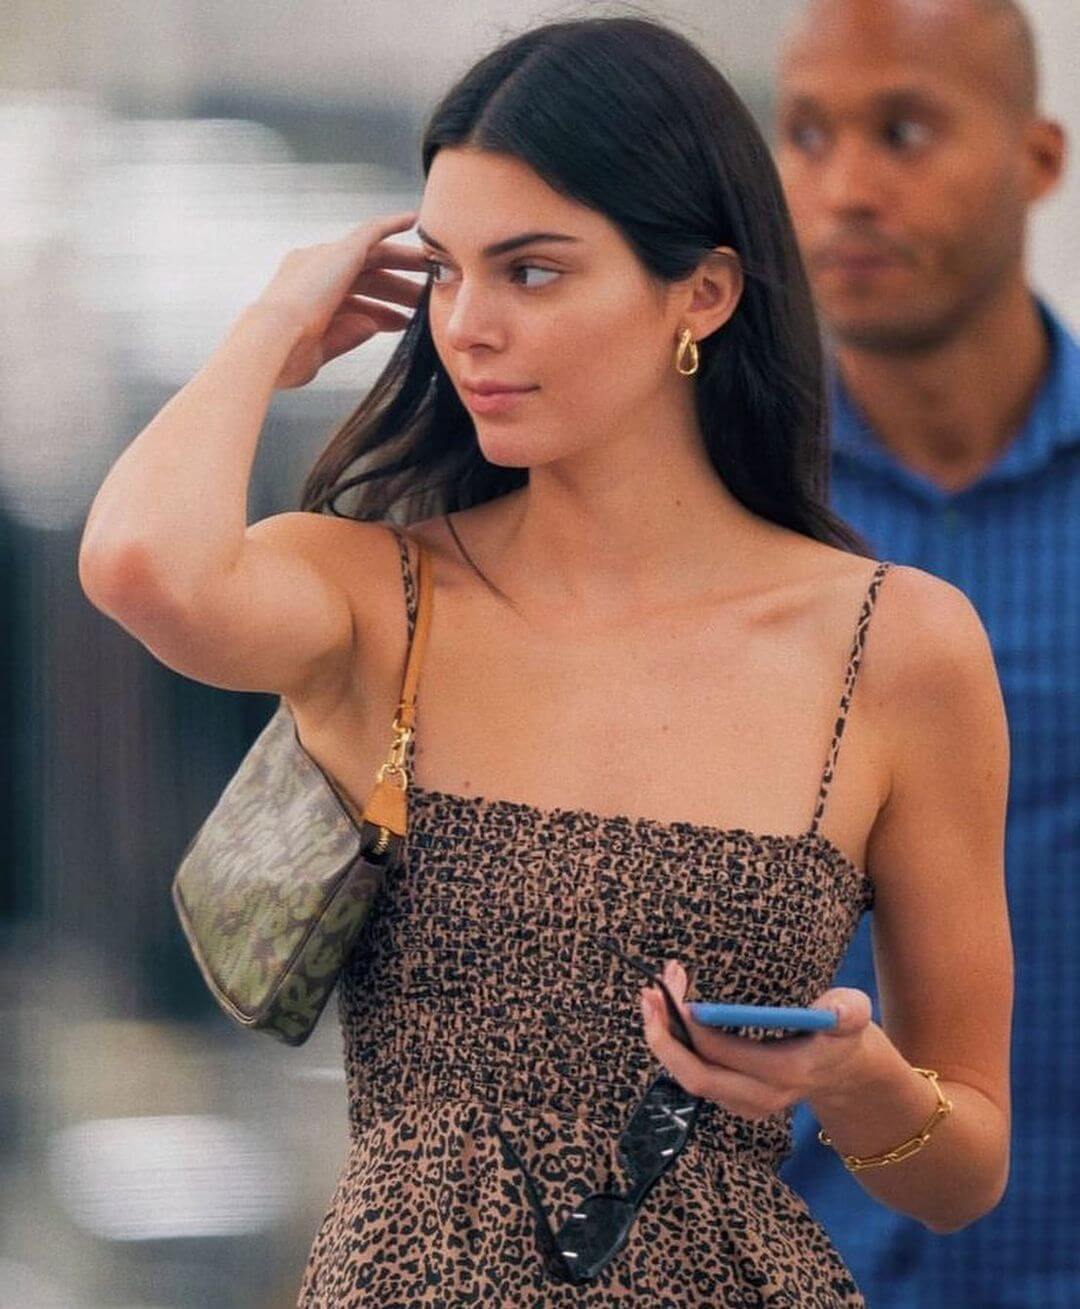 Clothes And Accessories You Need To Dress Like Kendall Jenner Kendall Doesn't Leave Without A Baguette Bag